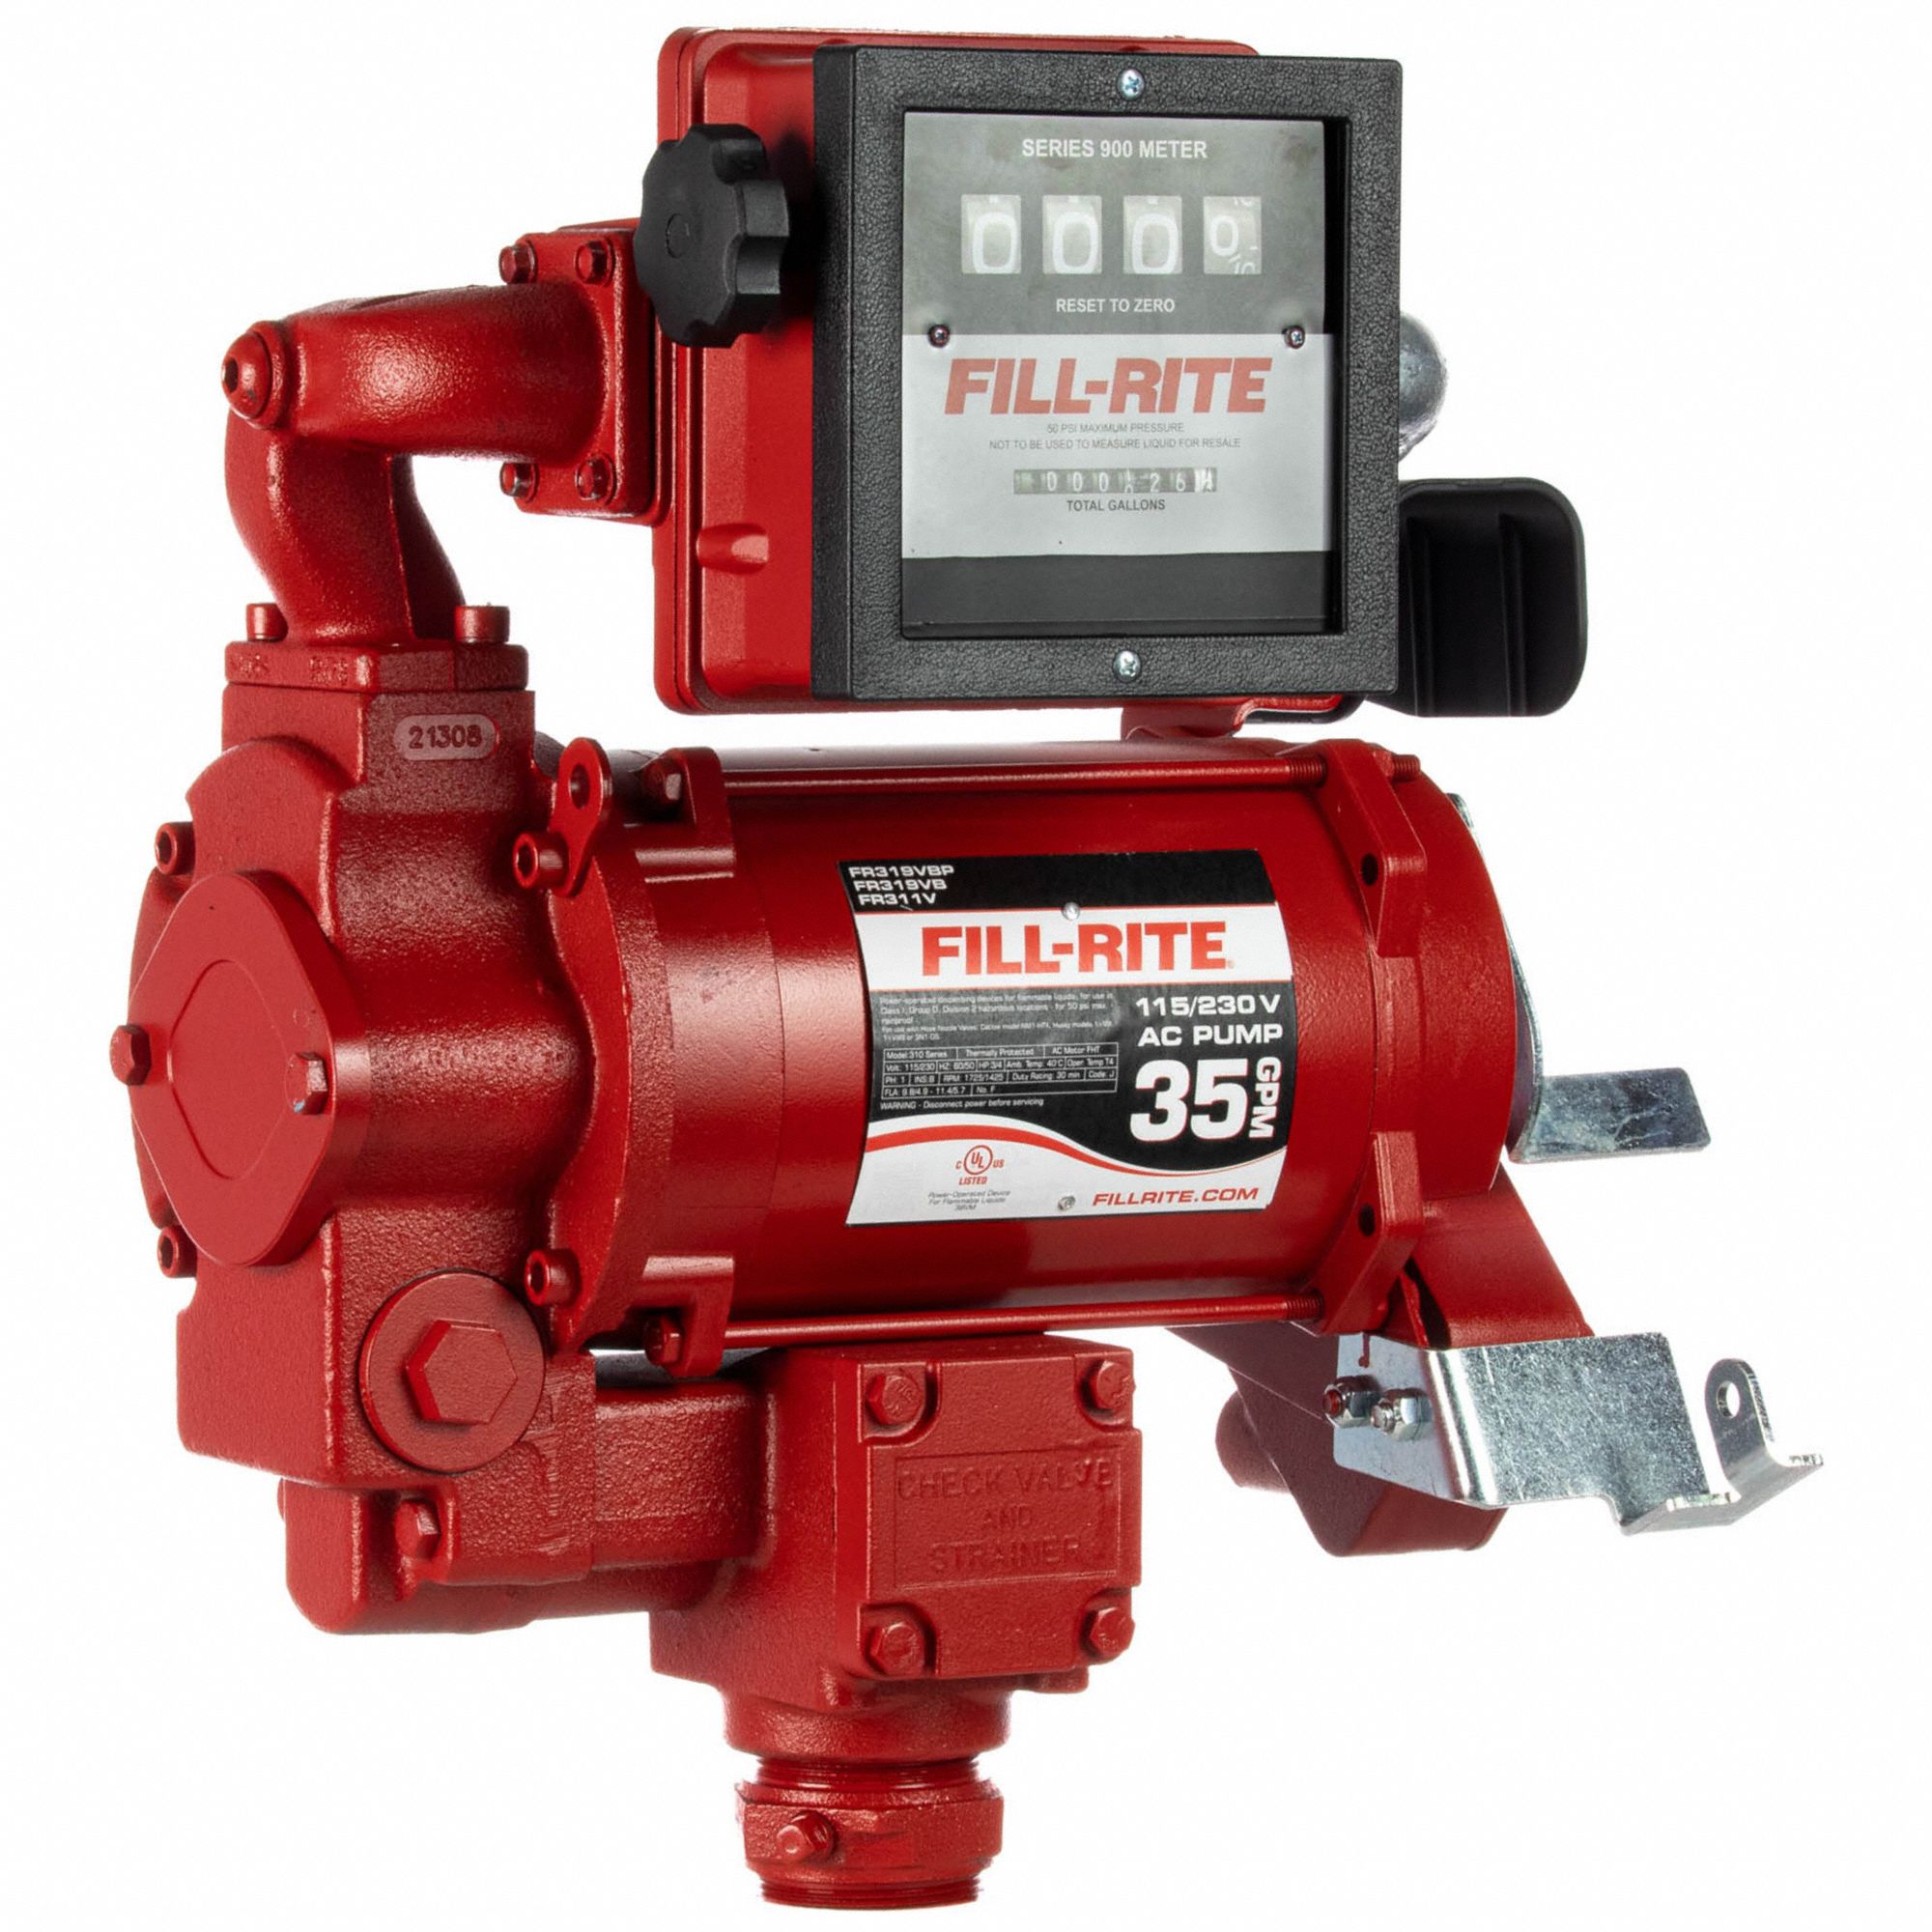 Fill-Rite 115/230V AC 35 GPM Fuel Transfer Pump with Meter | FR311VN